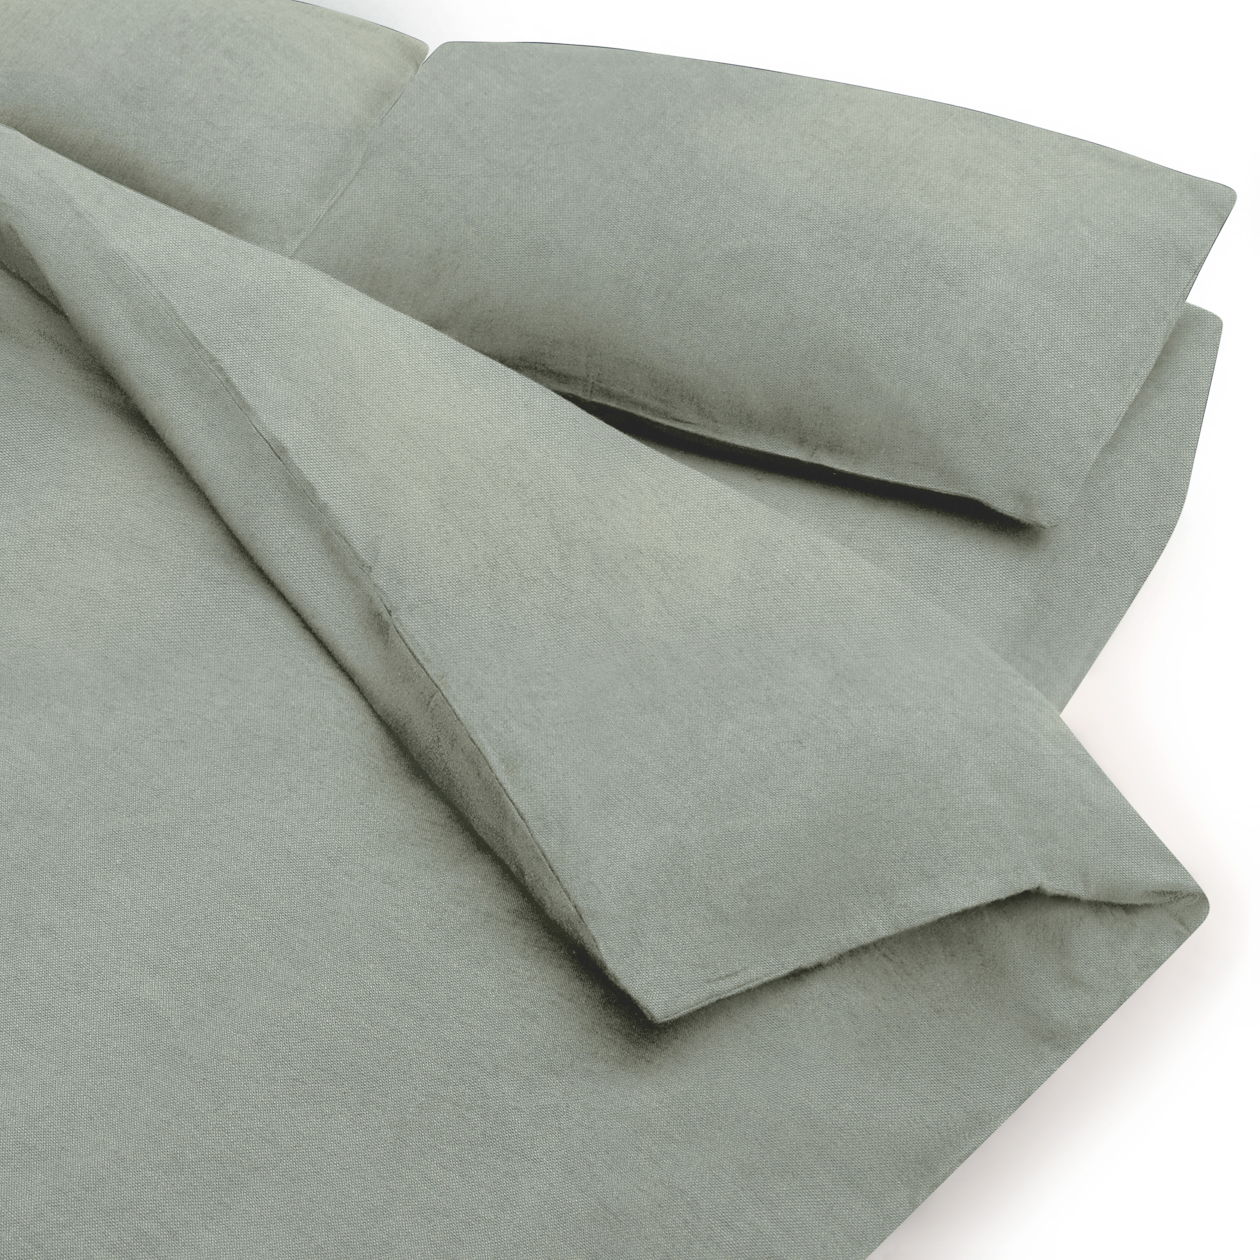 Washed Cotton Duvet Cover- King Size